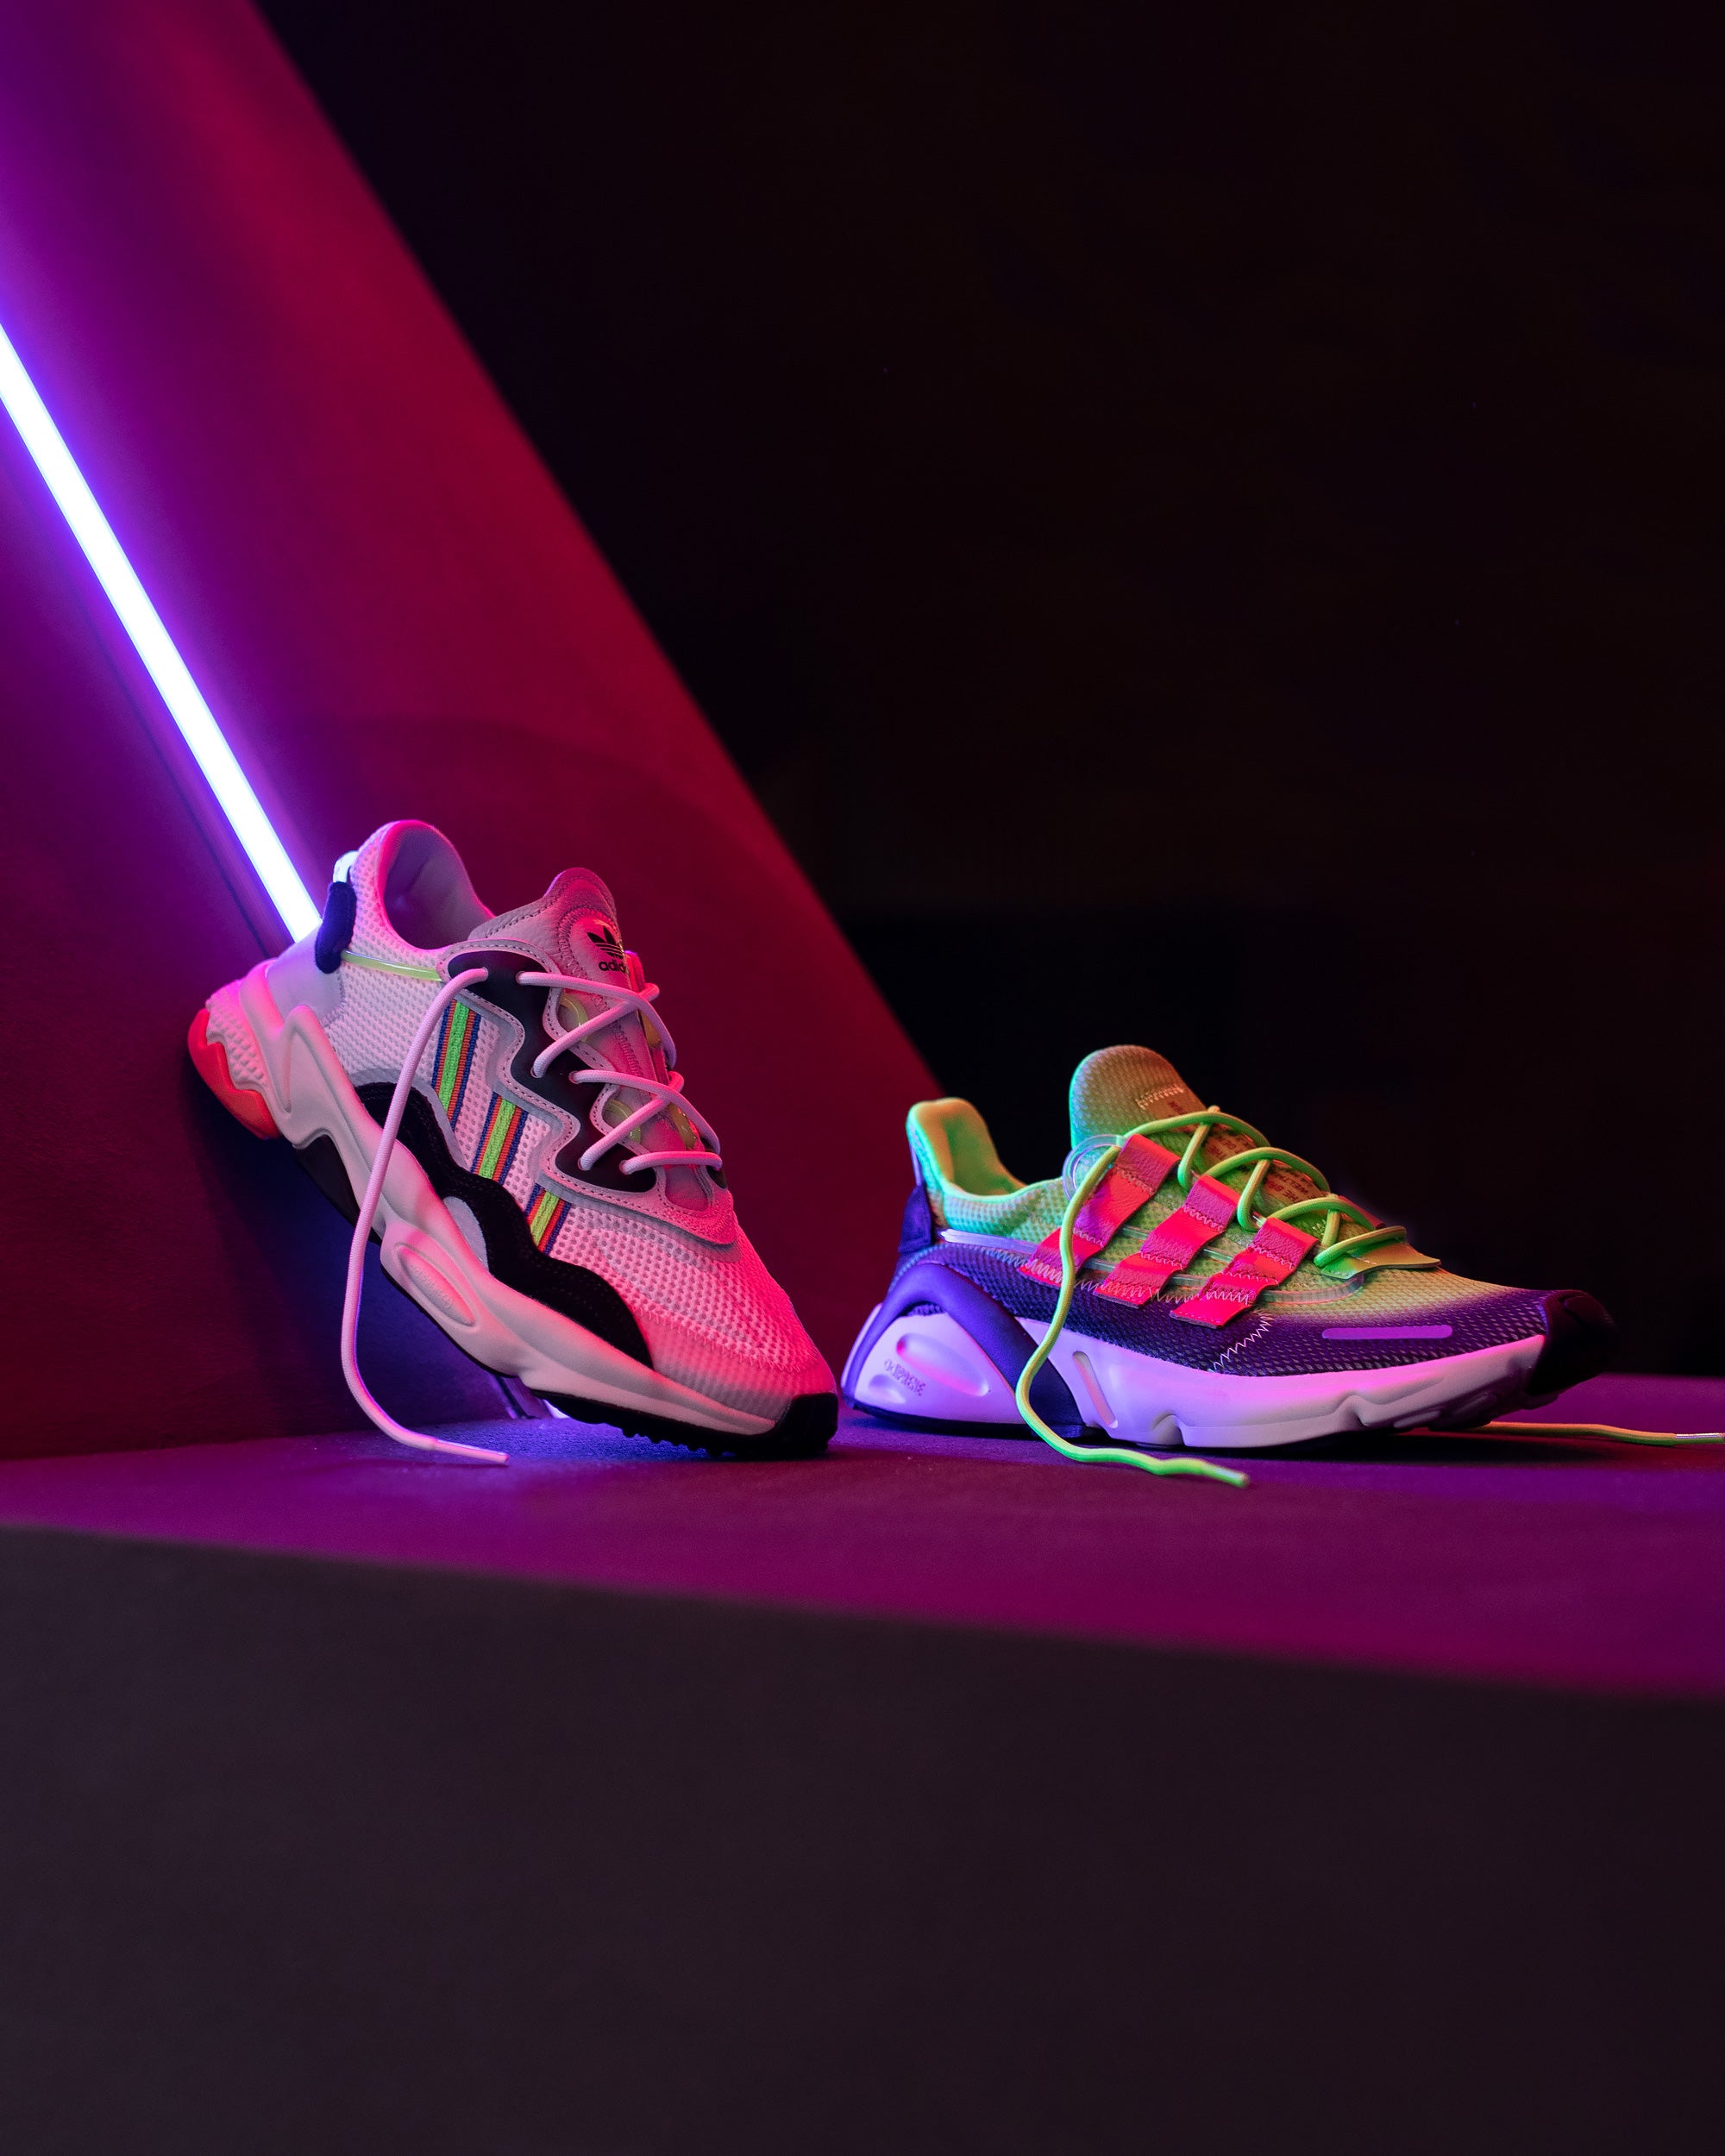 adidas presents the Era Pack – Extra Butter